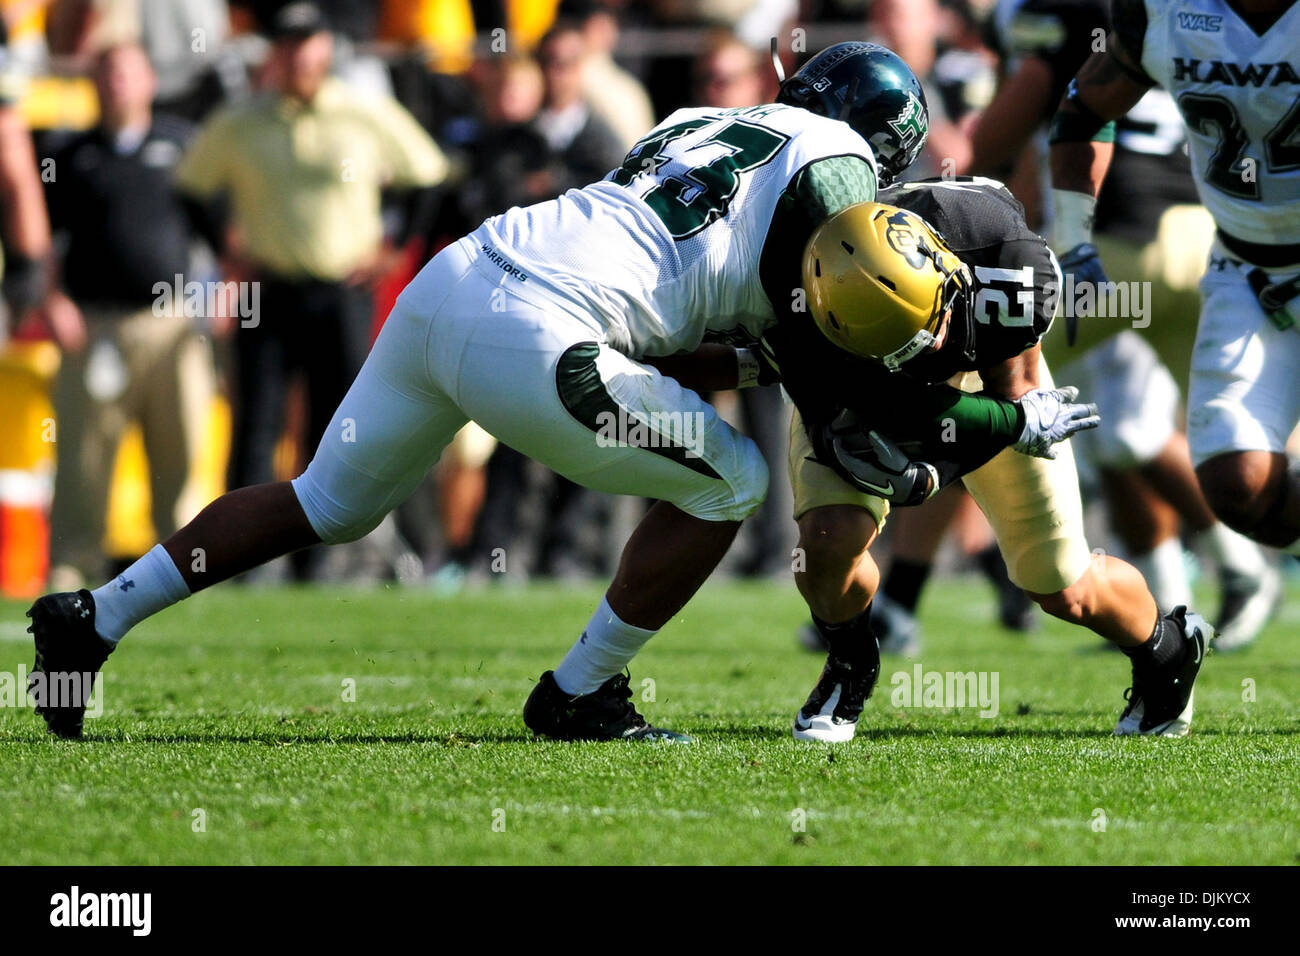 Sept. 17, 2010 - Boulder, Colorado, United States of America - Colorado Buffalos Scotty McKnight (21) gets tackled by Hawaii defensive tackle Zach Masch (47) in the second half at Folsom Field. Colorado defeated Hawaii 31-13. (Credit Image: © Michael Furman/Southcreek Global/ZUMApress.com) Stock Photo